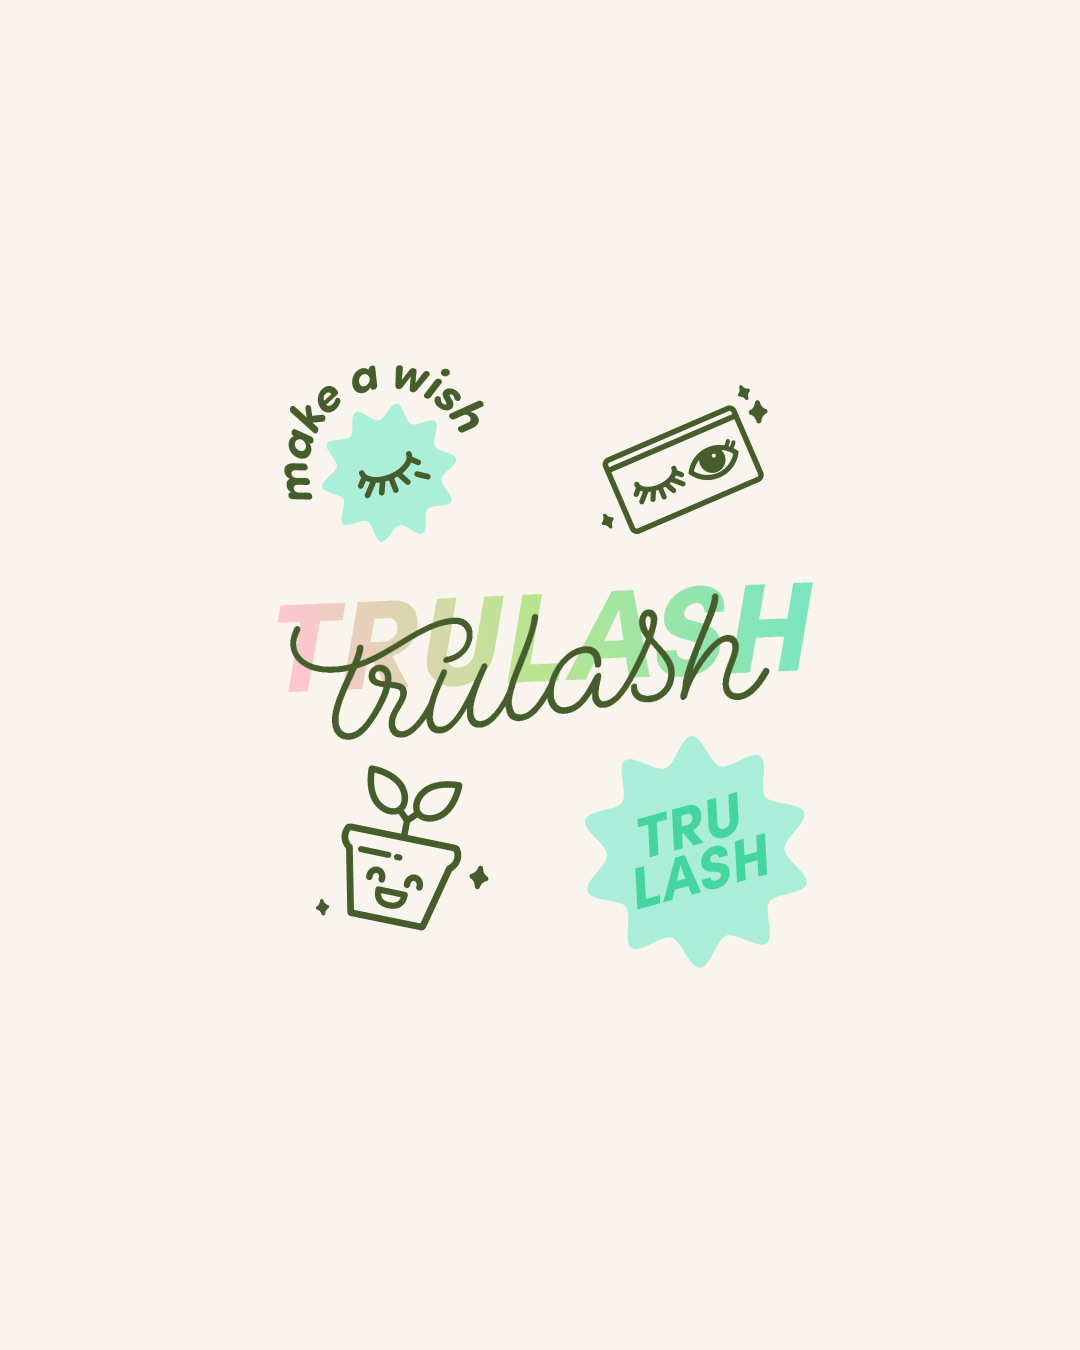 Animated stickers for Trulash, non-toxic plant fiber lashes - designed by Wiltshire-based graphic designer, Kaye Huett